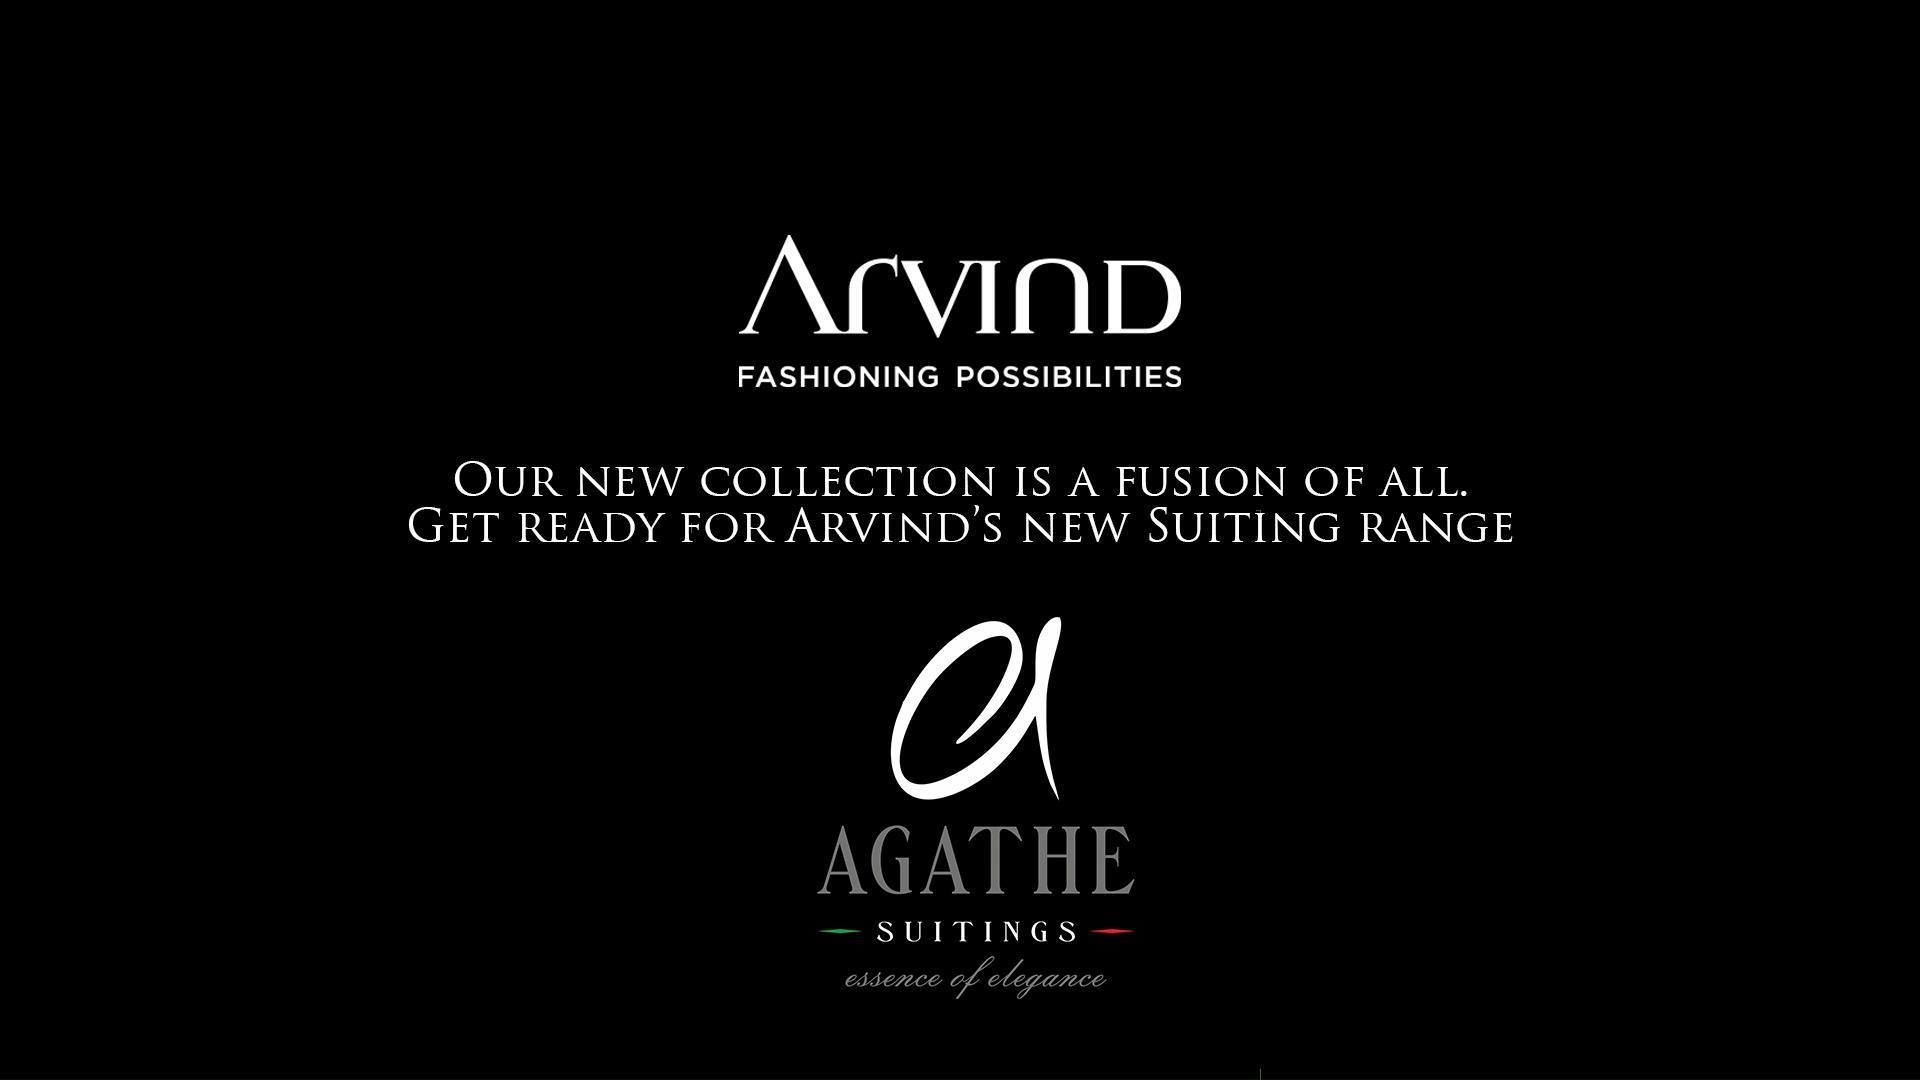 The new Suiting language of Arvind. A collection of subtle and elegant designs, custom-made to suit fast fashion, get ready for Agathe.